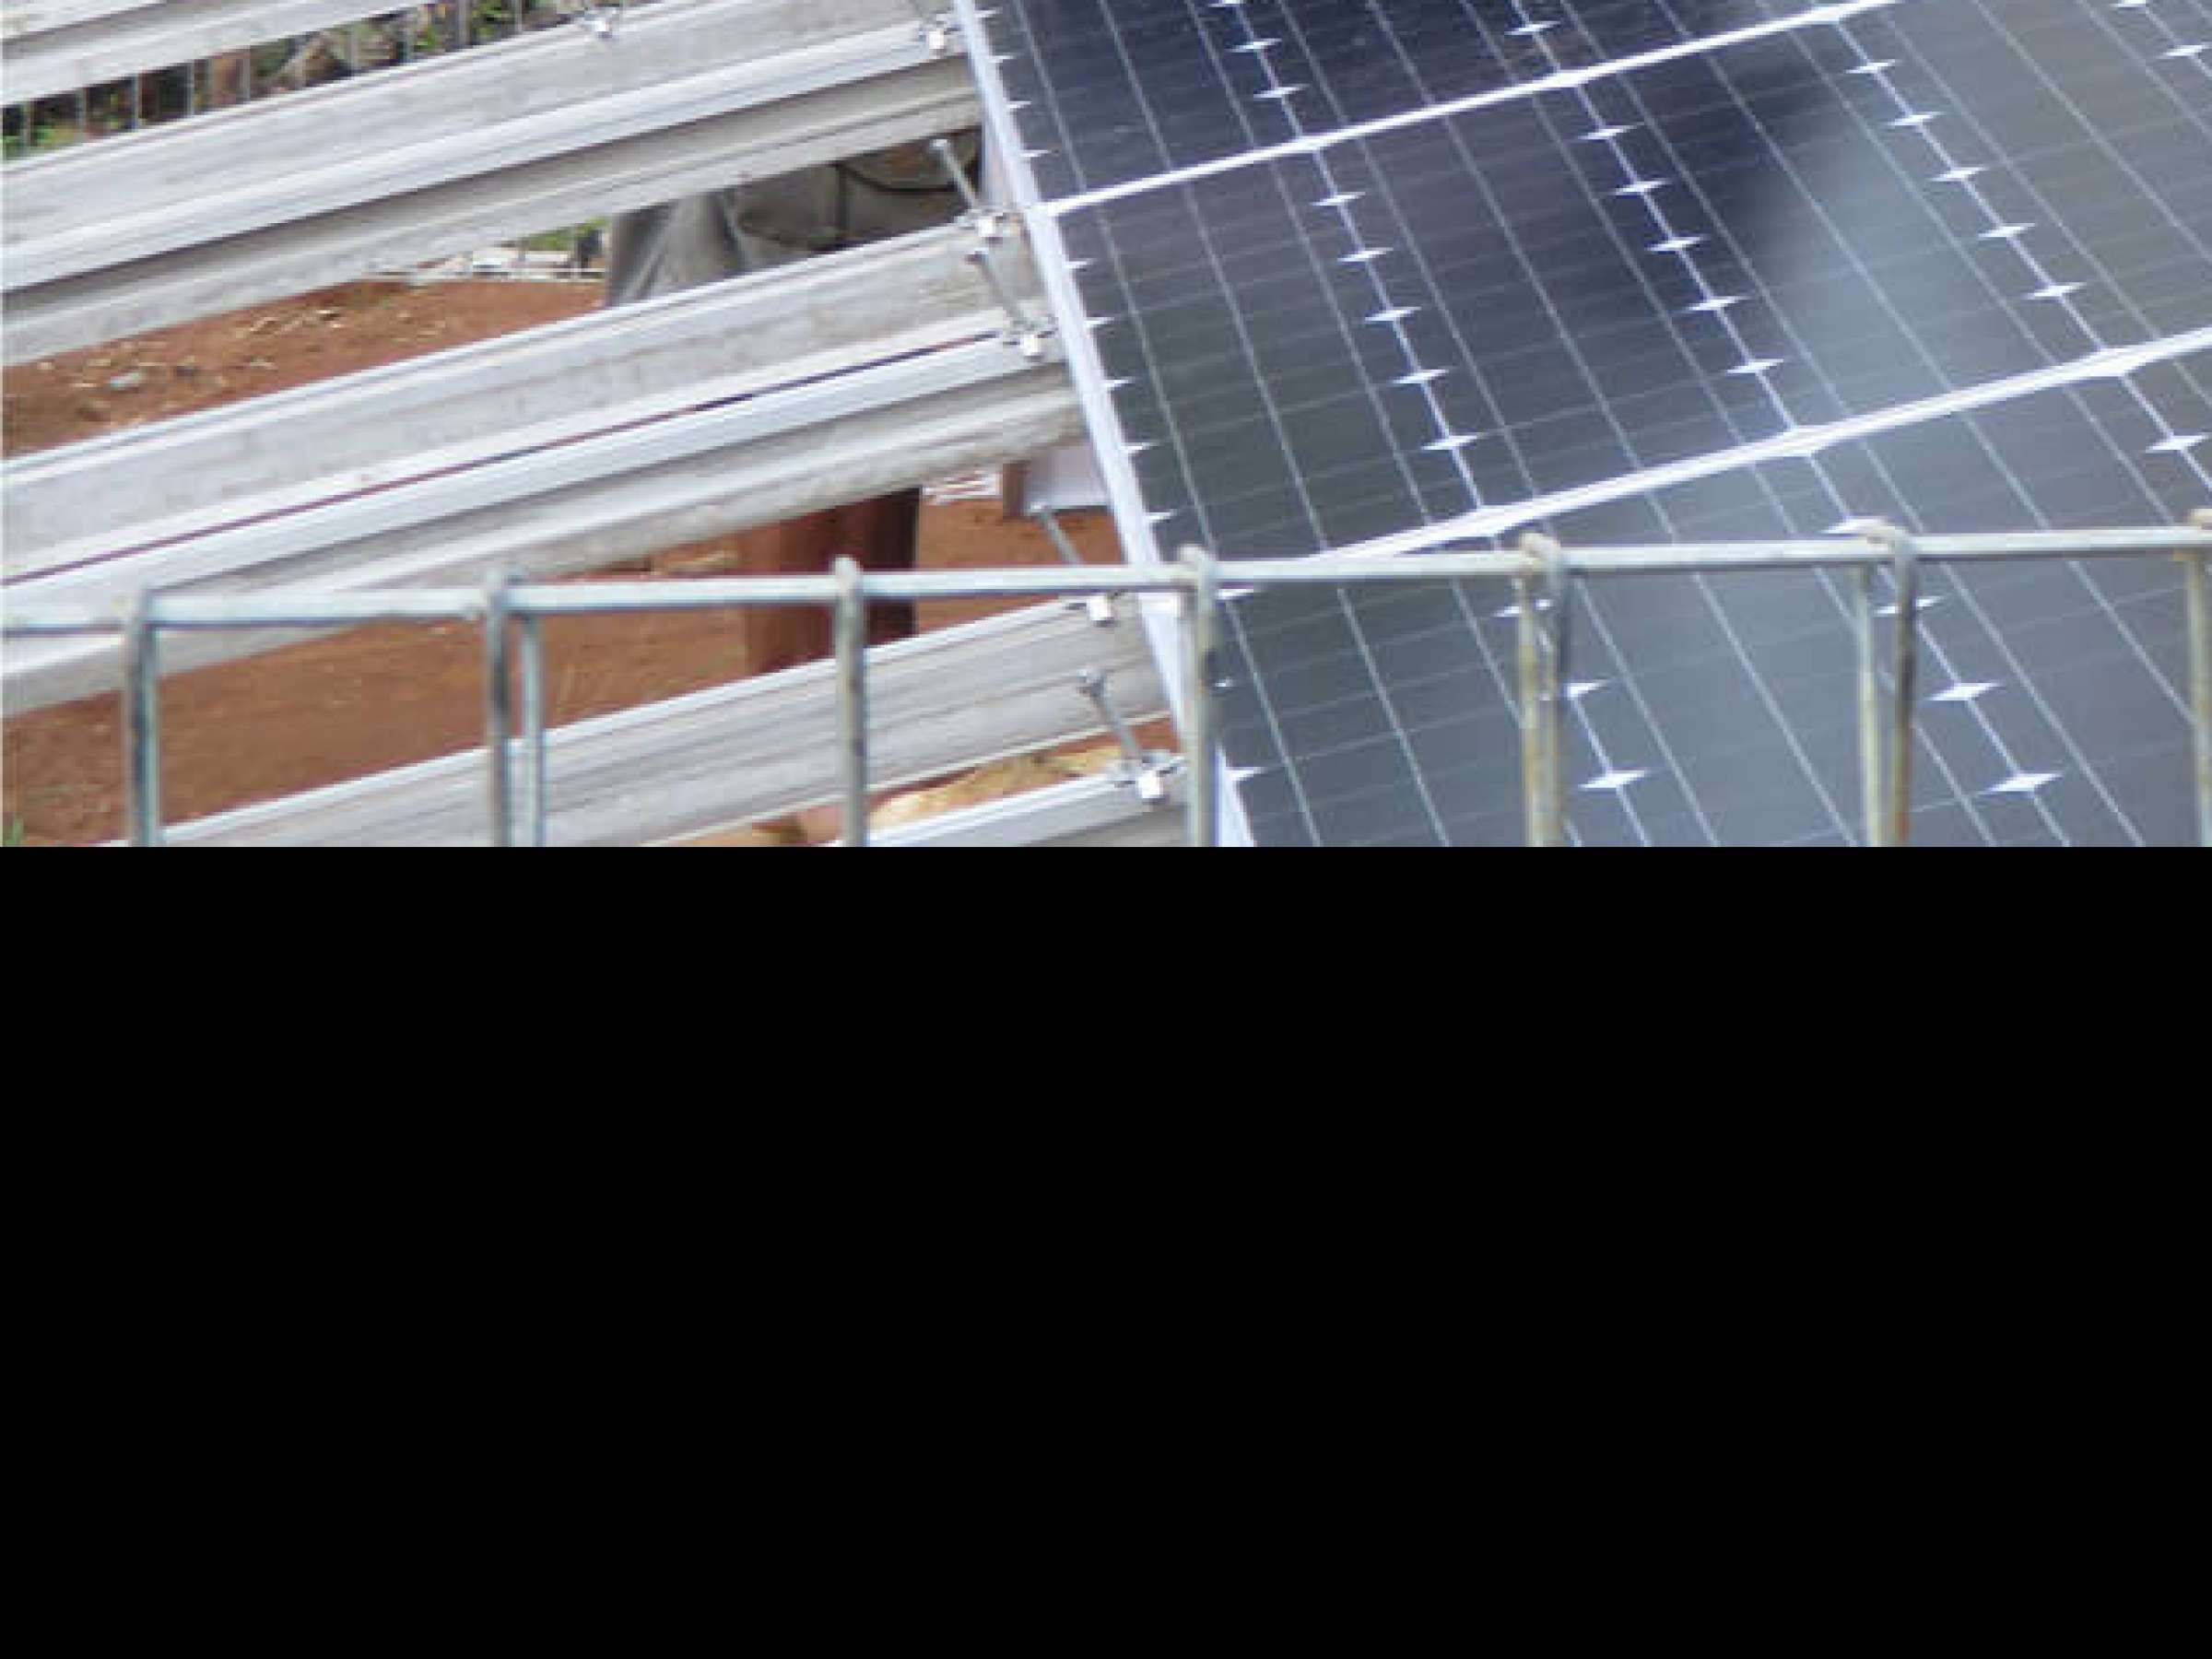 The process of installing a photovoltaic system in rural areas